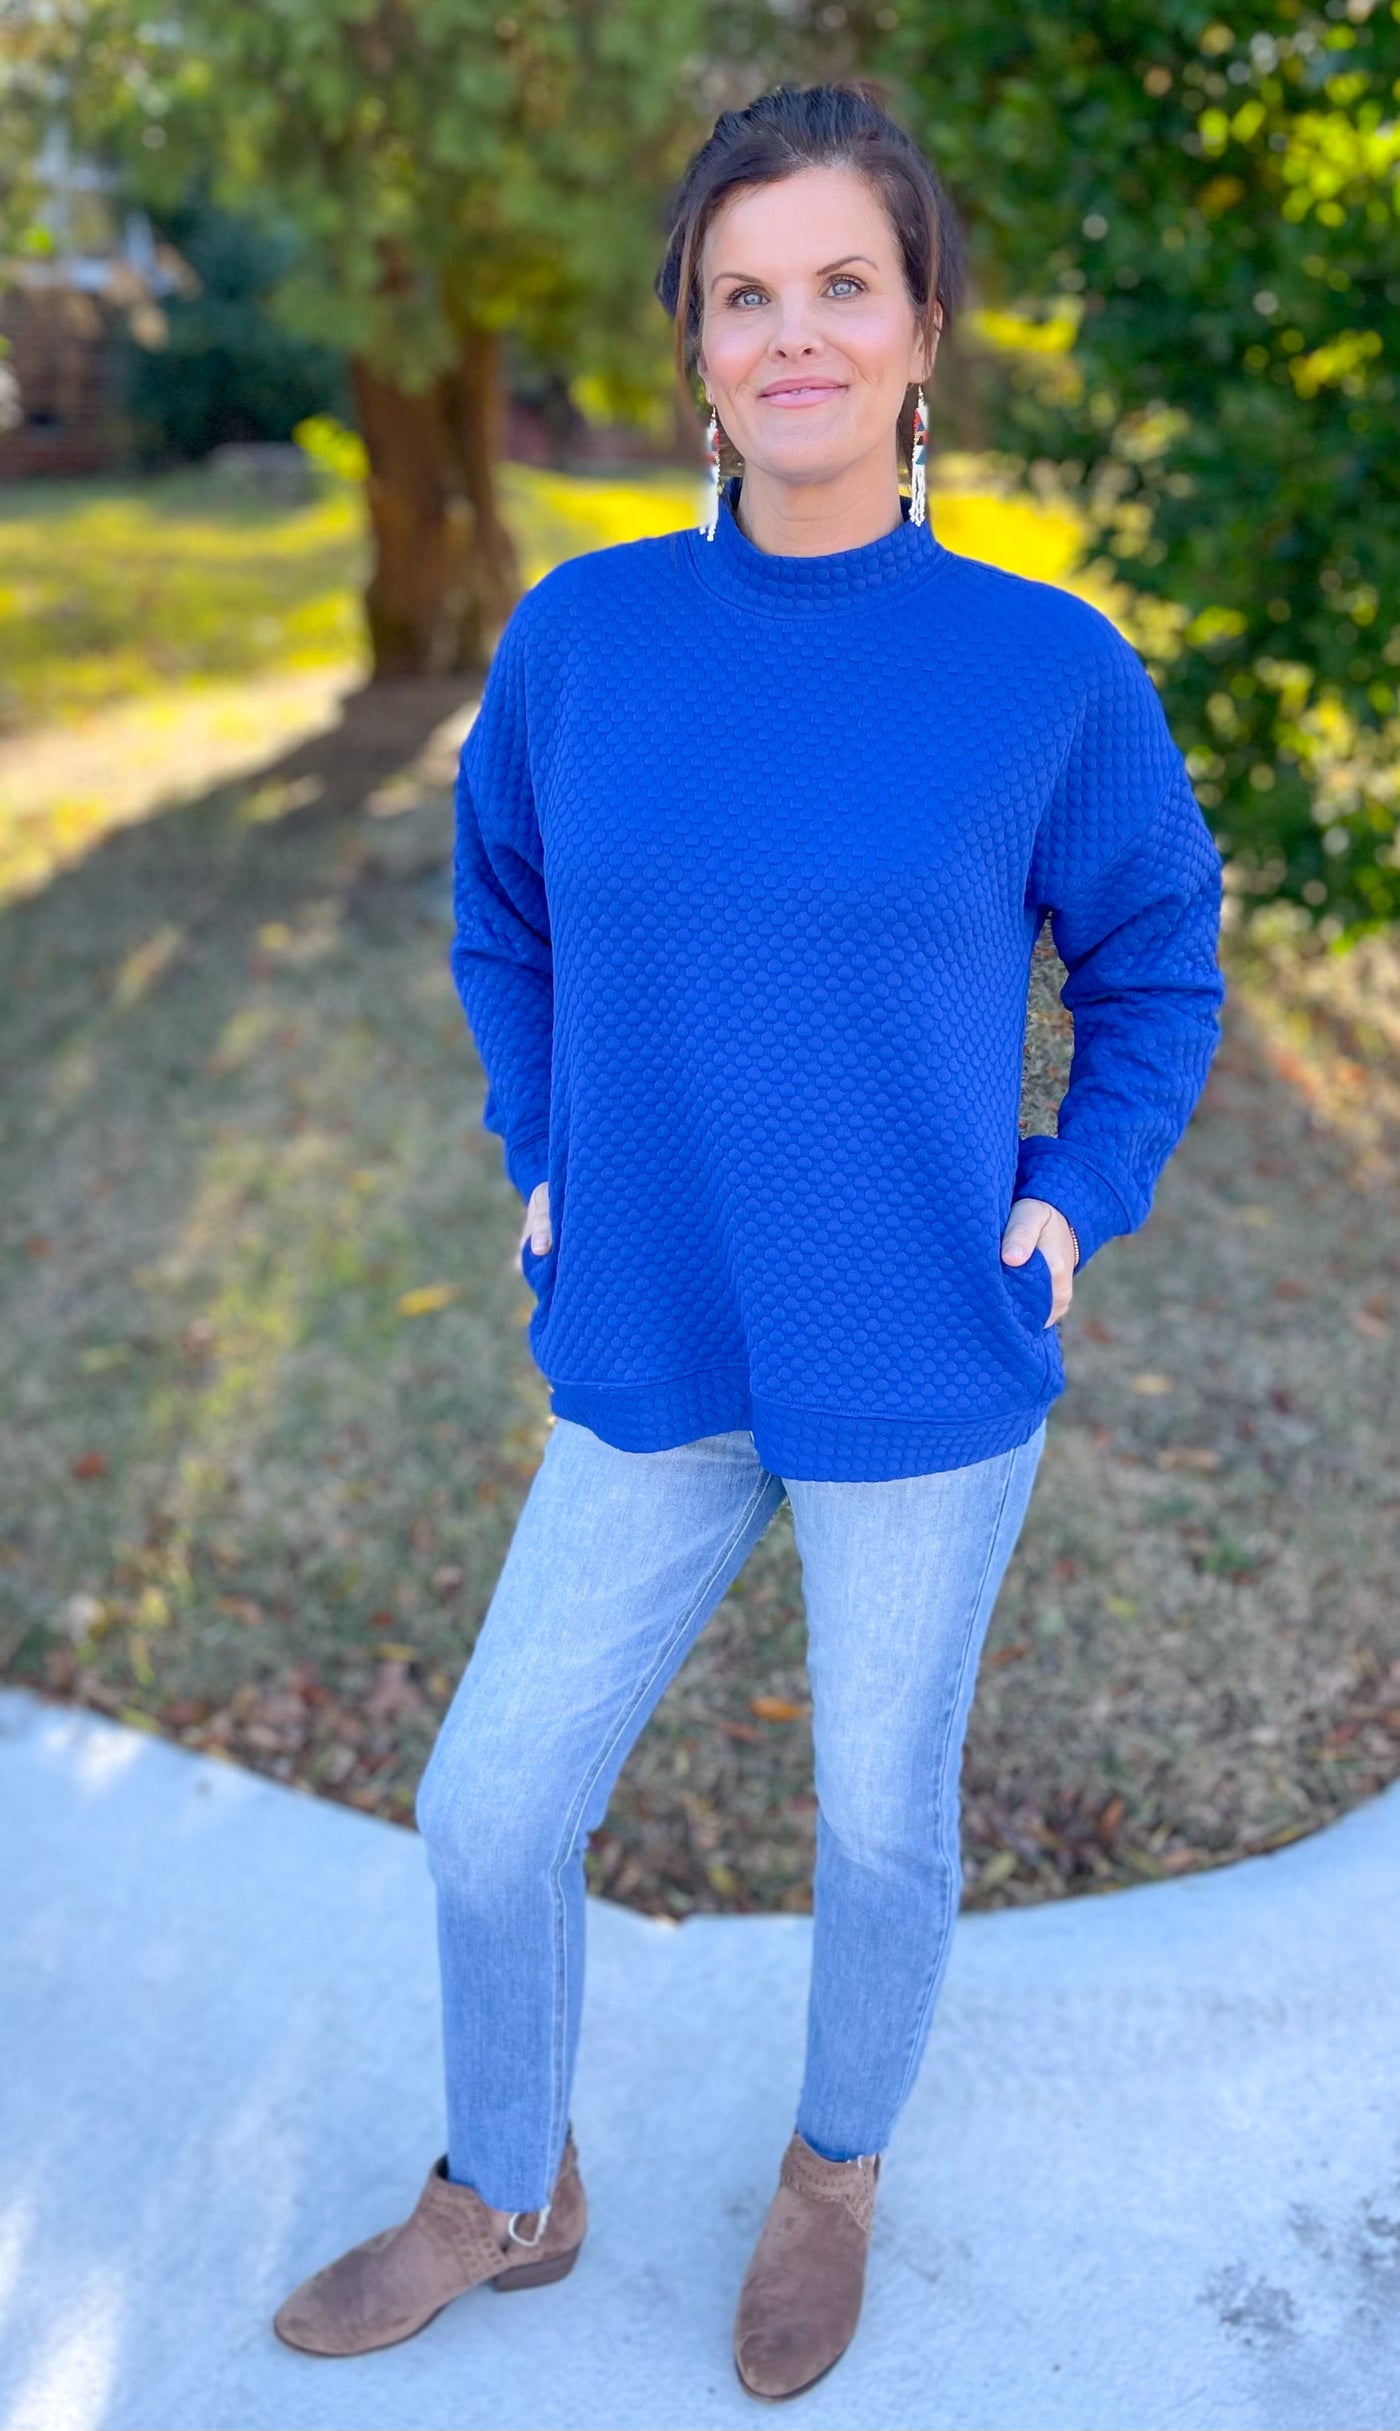 Hey There Royal Blue Textured Mock Neck Knit Top